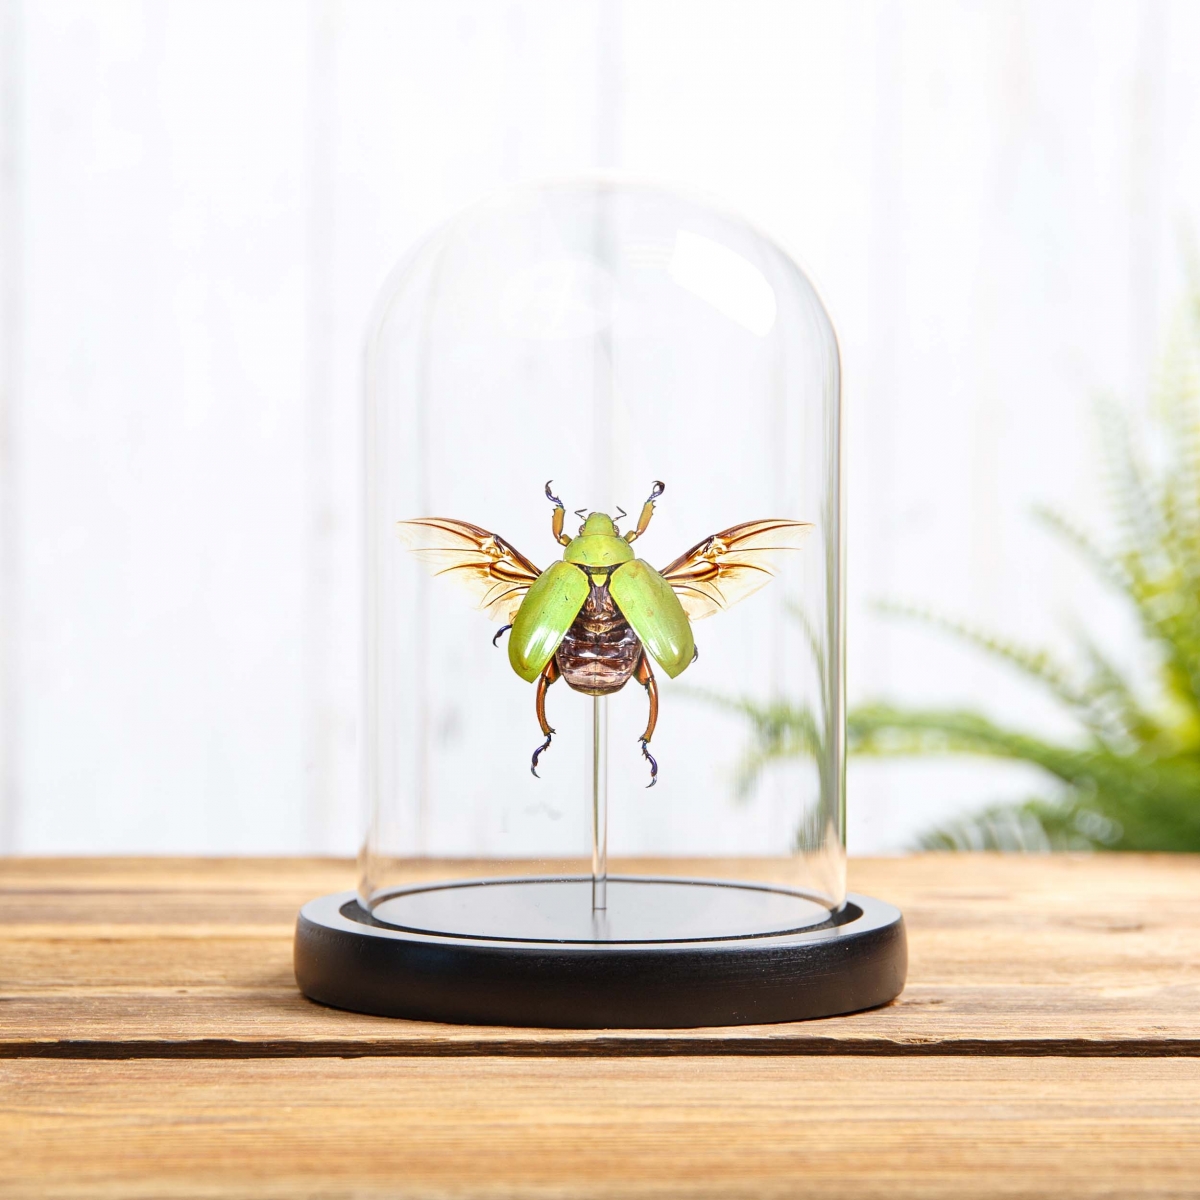 Minibeast Ruteline Scarab Beetle in Glass Dome with Wooden Base (Chrysina adolphi)